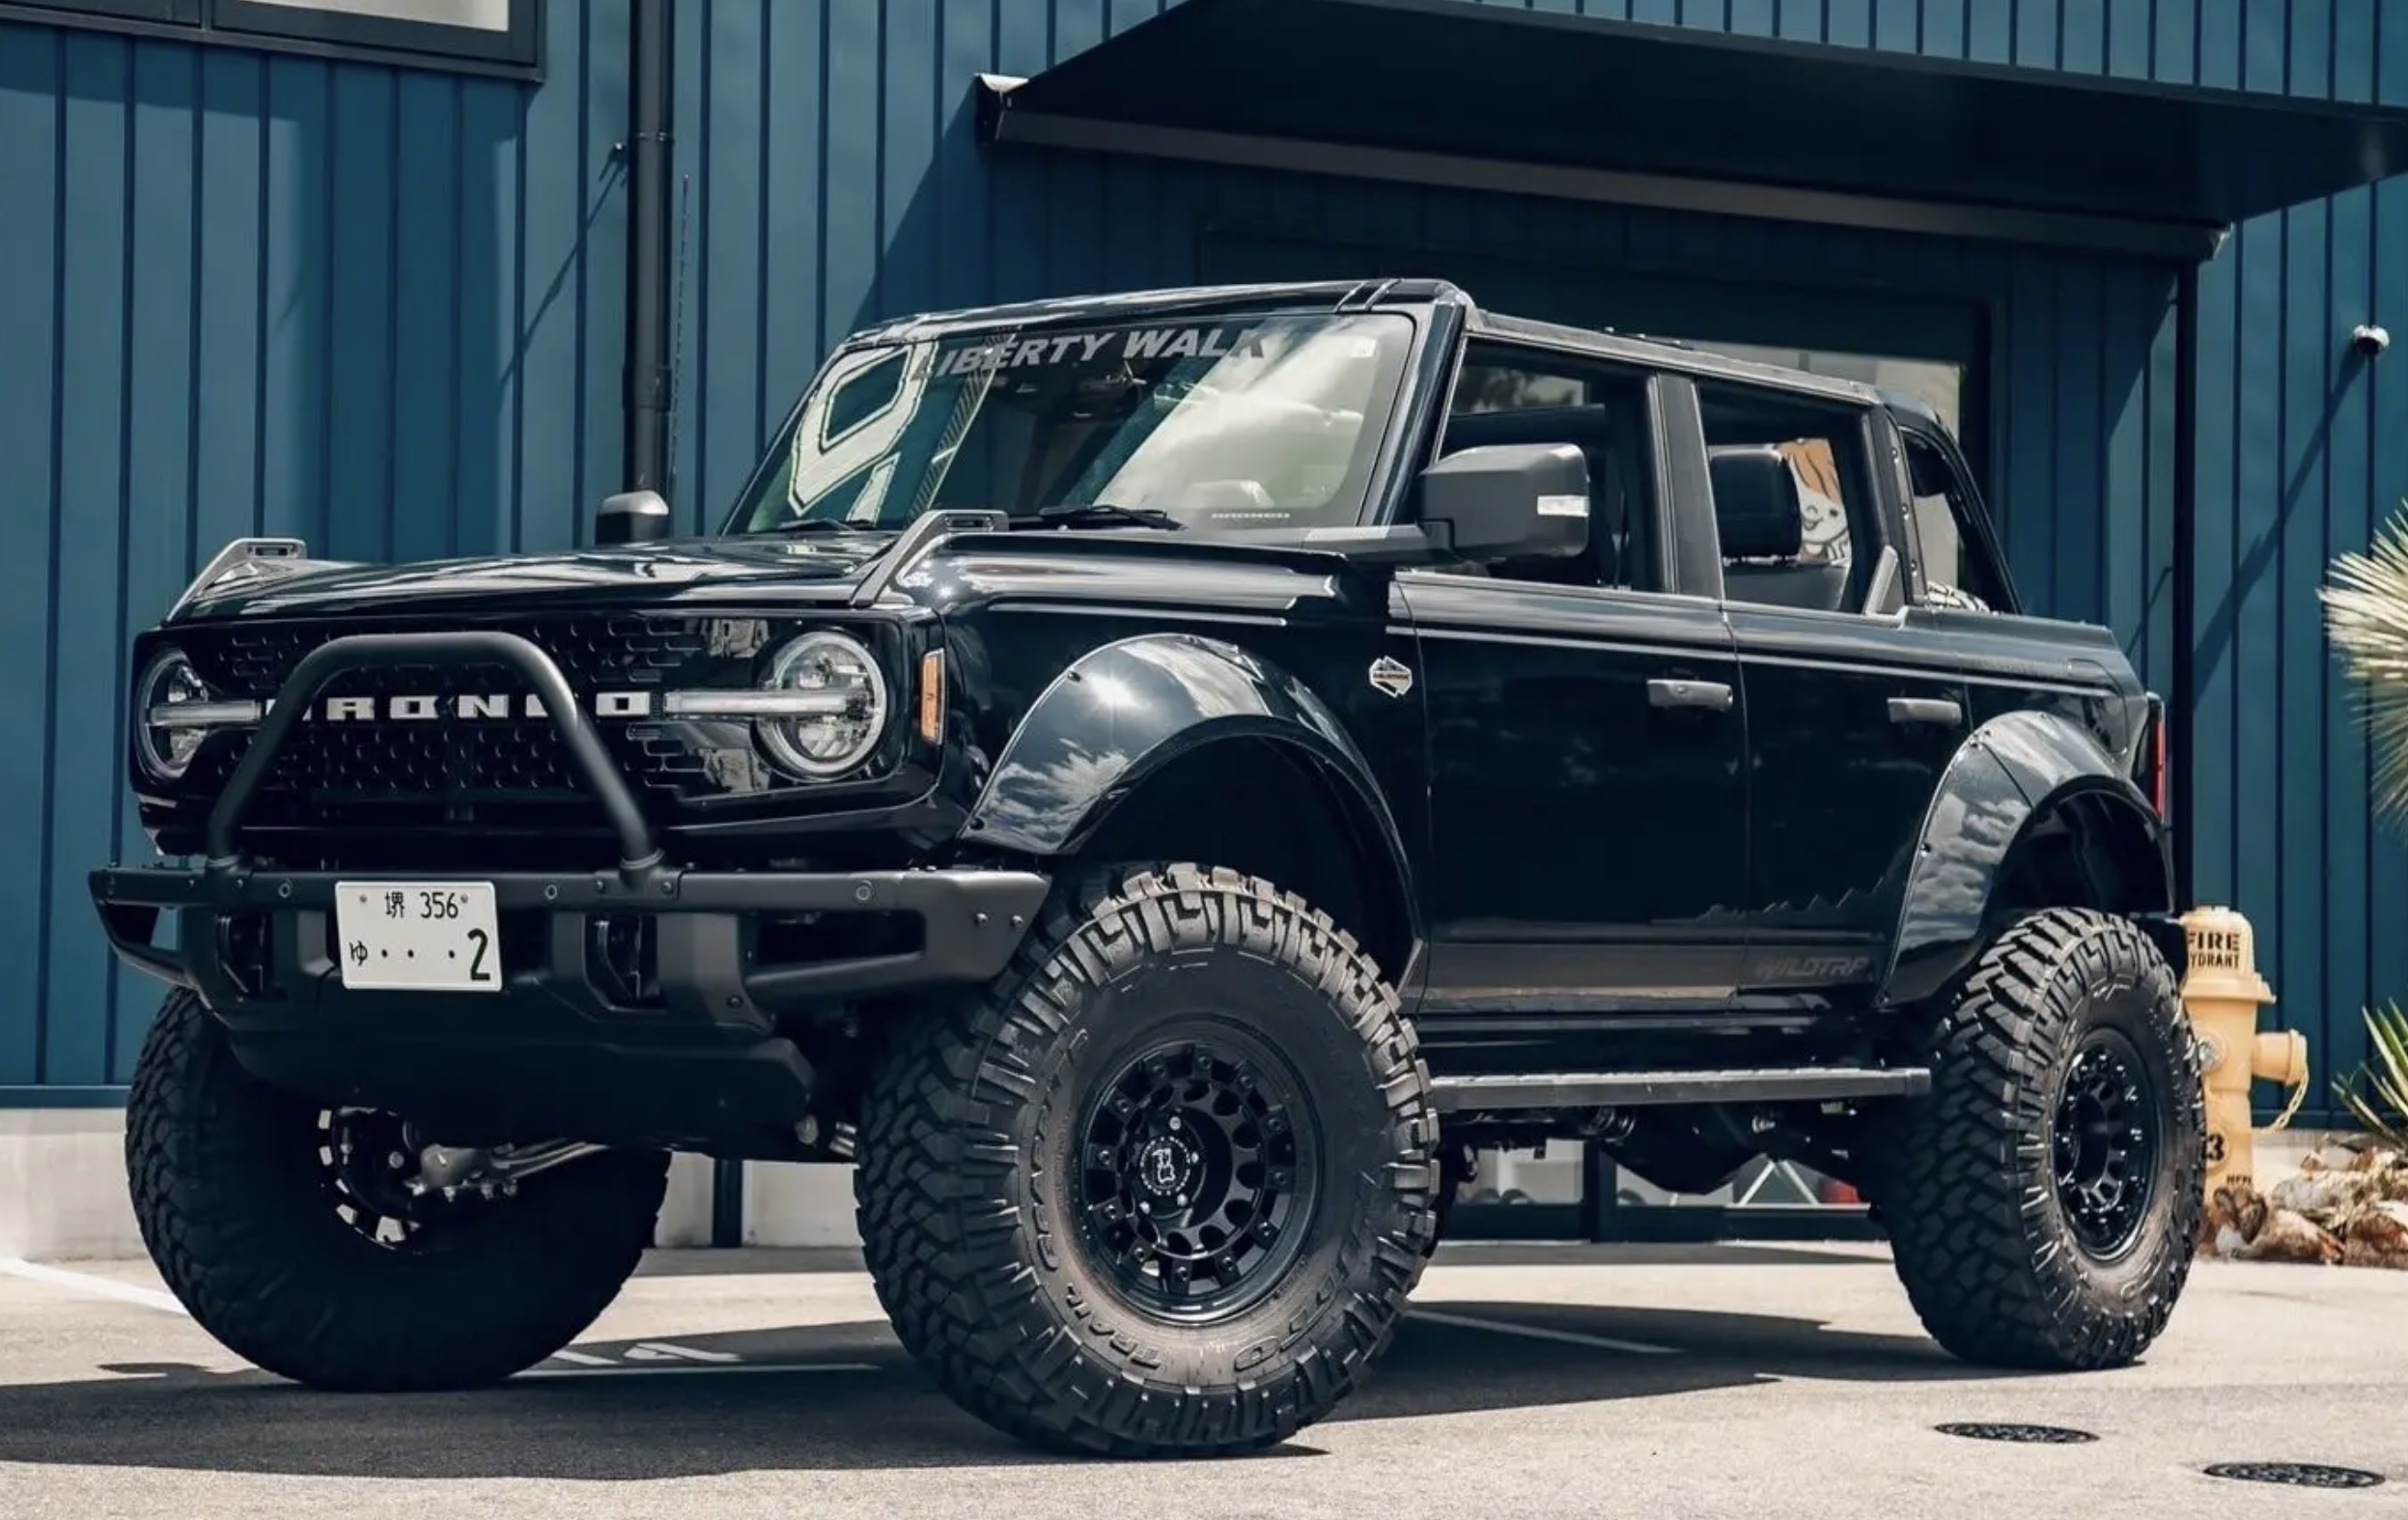 Ford Bronco Liberty Walk Sells a Ford Bronco Widebody Kit old-school